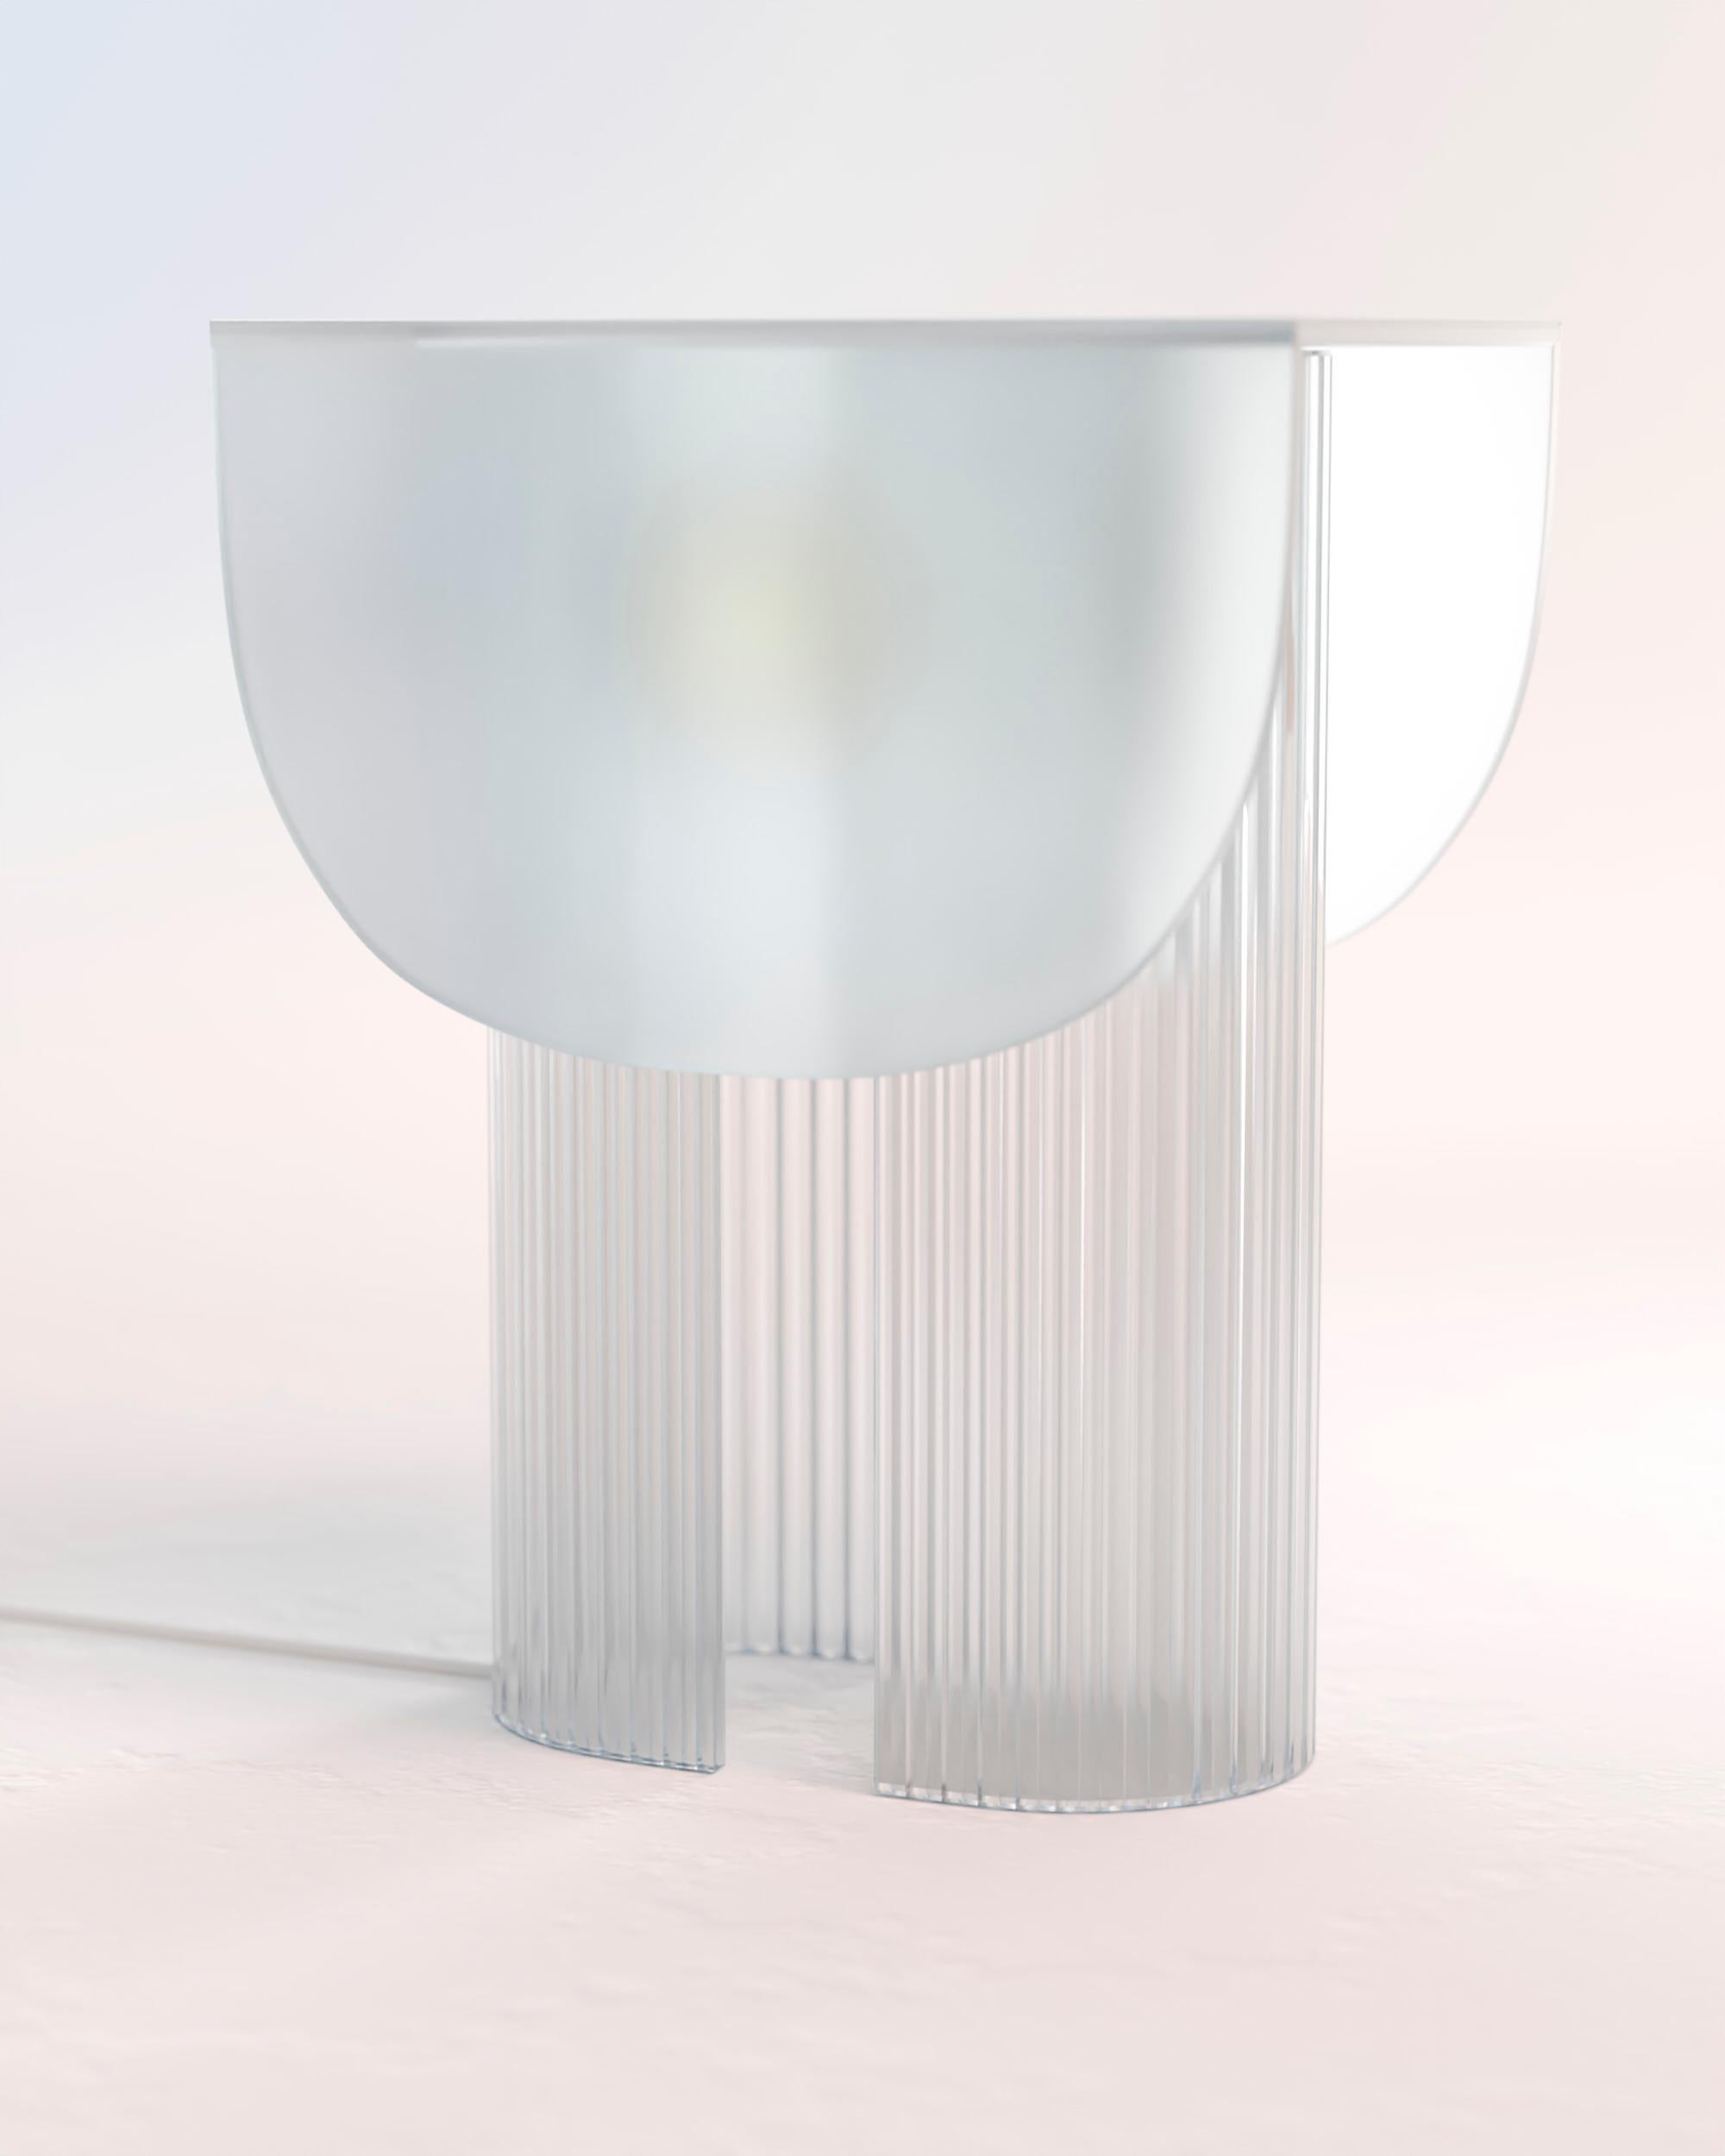 Helia Table Lamp by Glass Variations
Dimensions: W 22 x D 31 x H 40 cm
Materials: Glass. 

With this 100% glass table lamp Bina Baitel celebrates light and sun. Its curved patterned glass structure and the satin finished glass cap diffuse a soft